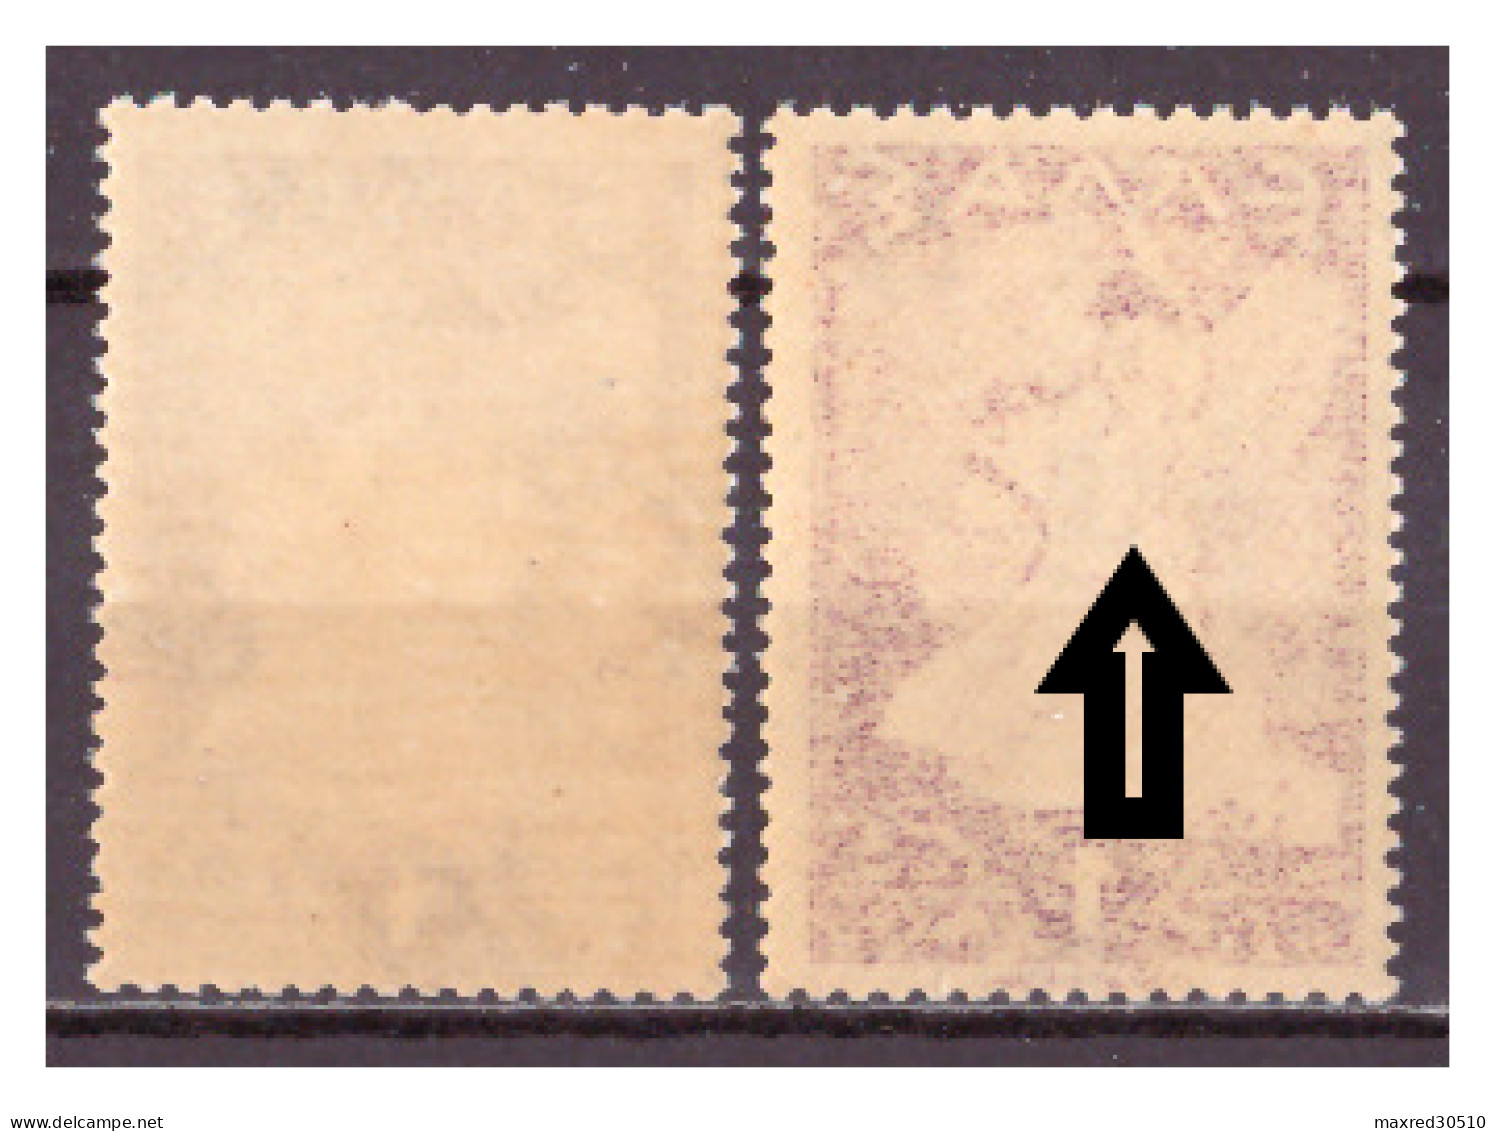 GREECE 1945 2X1L. OF THE "GLORY ISSUE" THE 2ND ONE (SEE ARROWS) WITH MIRROR PRINTING AT THE GUM ERROR MNH - Variétés Et Curiosités